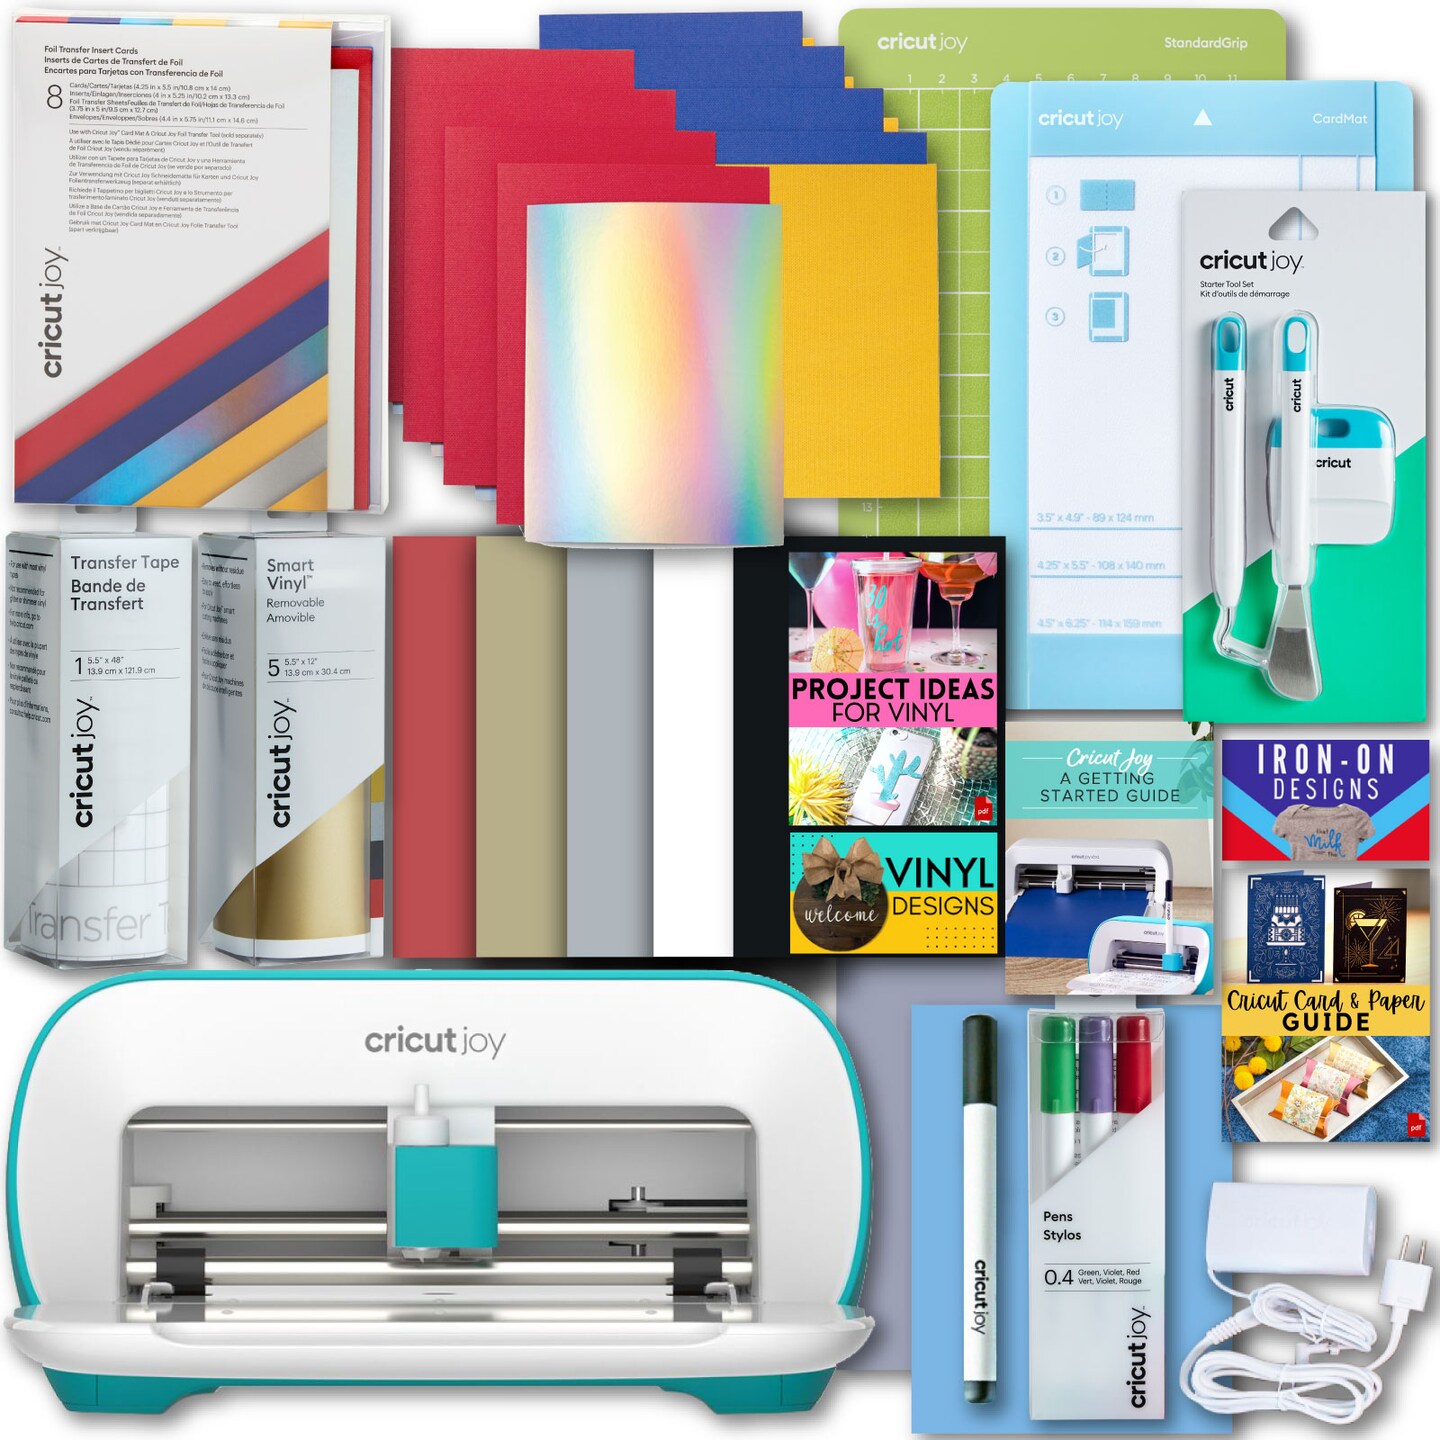 Cricut Joy Machine with Cards, Smart Vinyl Sampler Roll and Tool Set Bundle for Beginner DIY Craft Projects